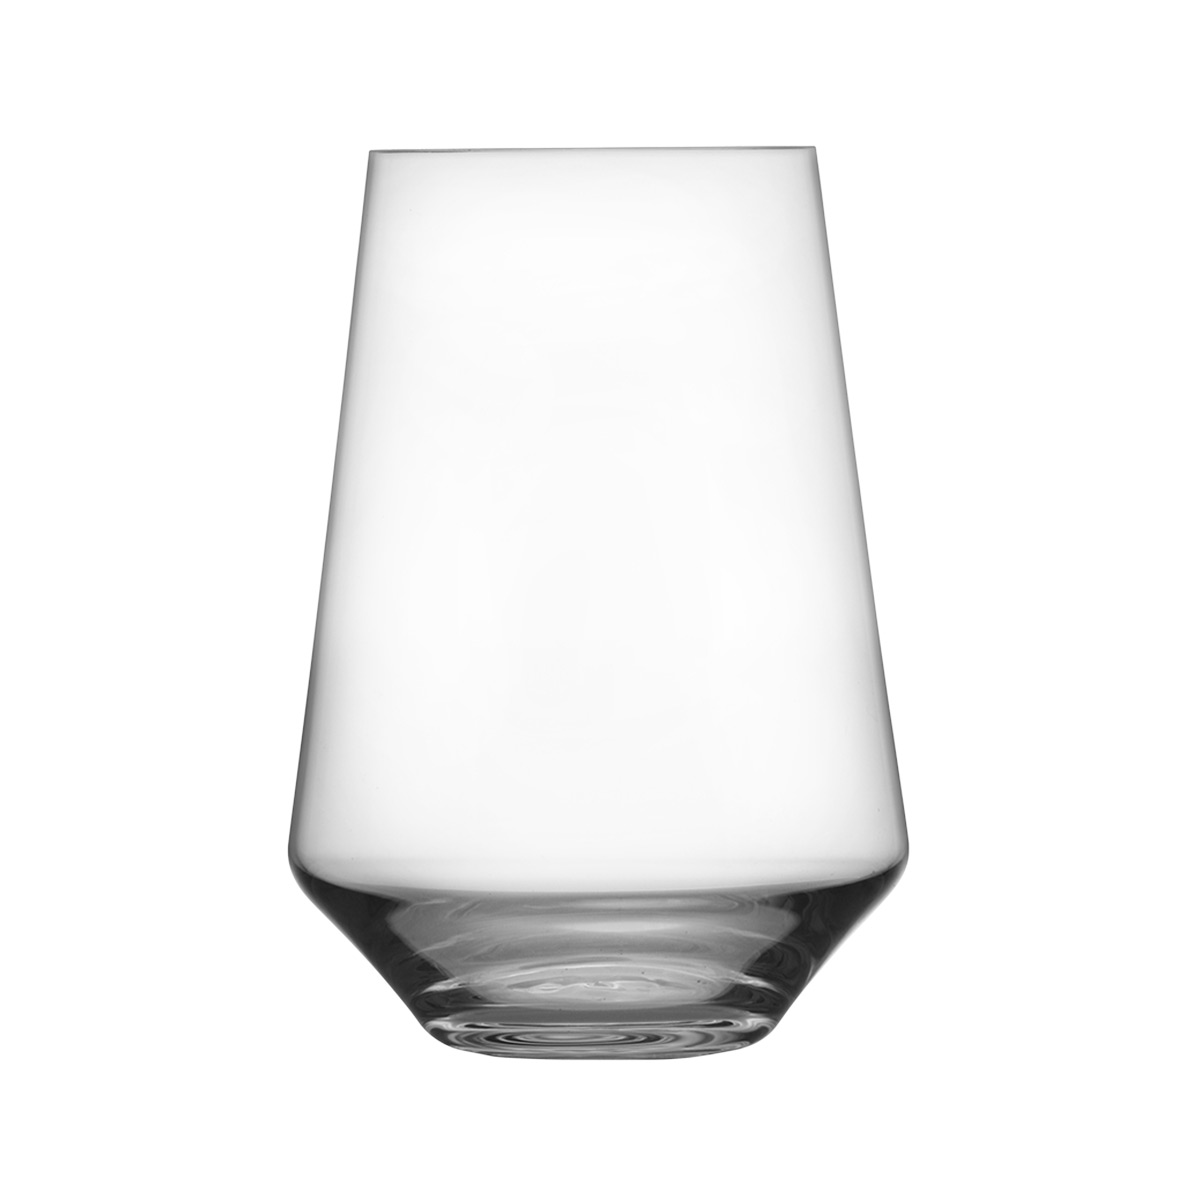 https://www.containerstore.com/catalogimages/515986/10098065-Pure-Stemless-fortessa-ven.jpg